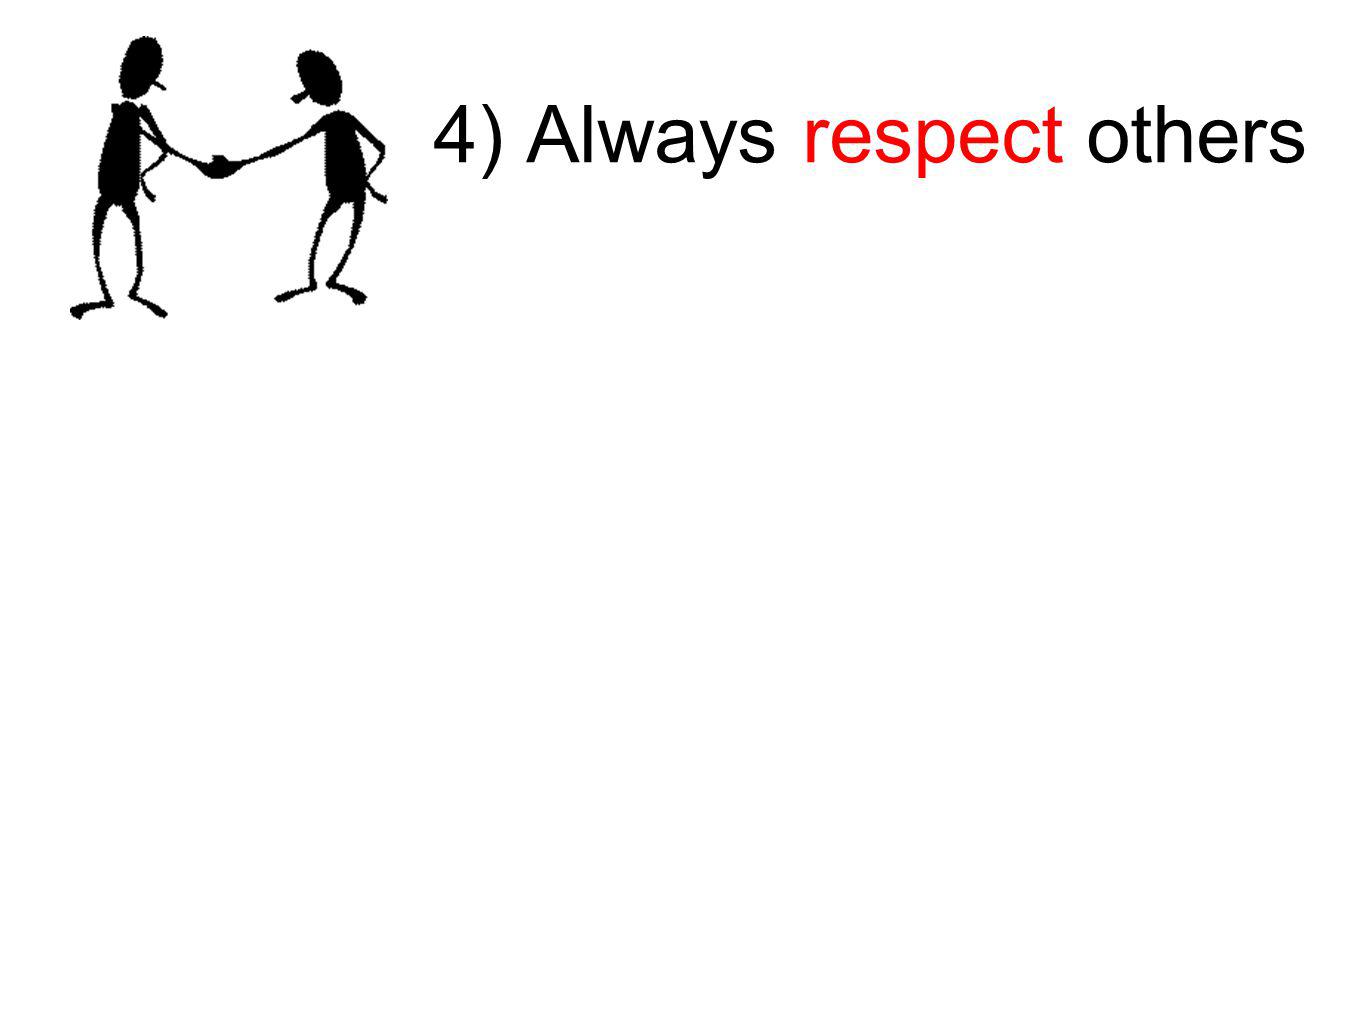 4) Always respect others